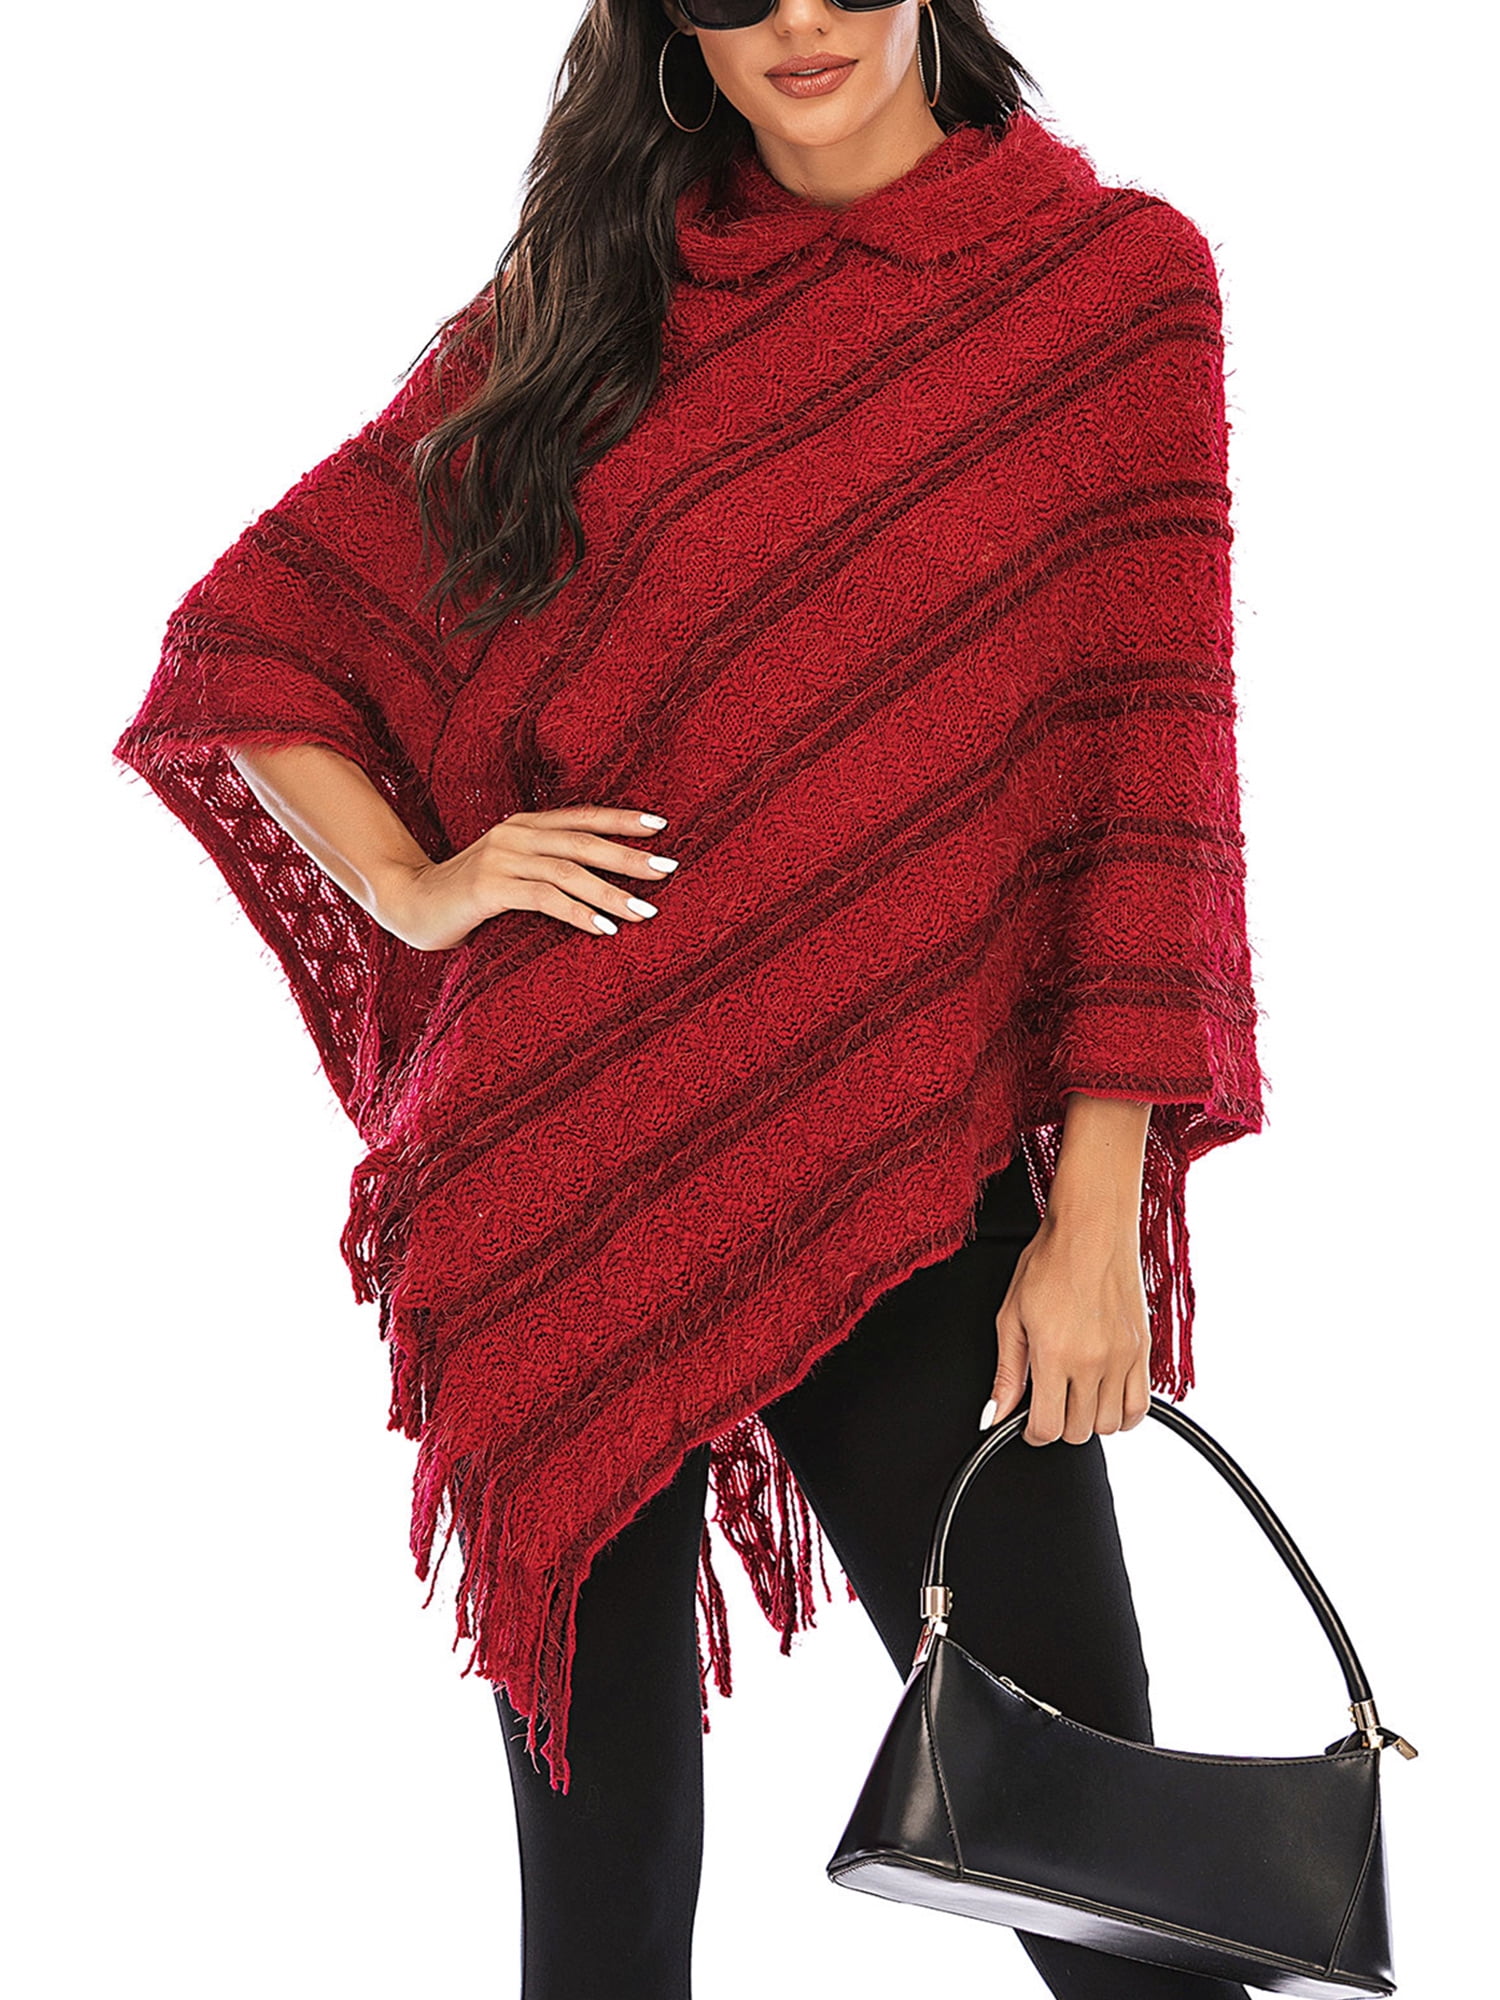 Ladies Womens Oversized Knit Waterfall Poncho Sweater Open Cape Hooded Cardigan 